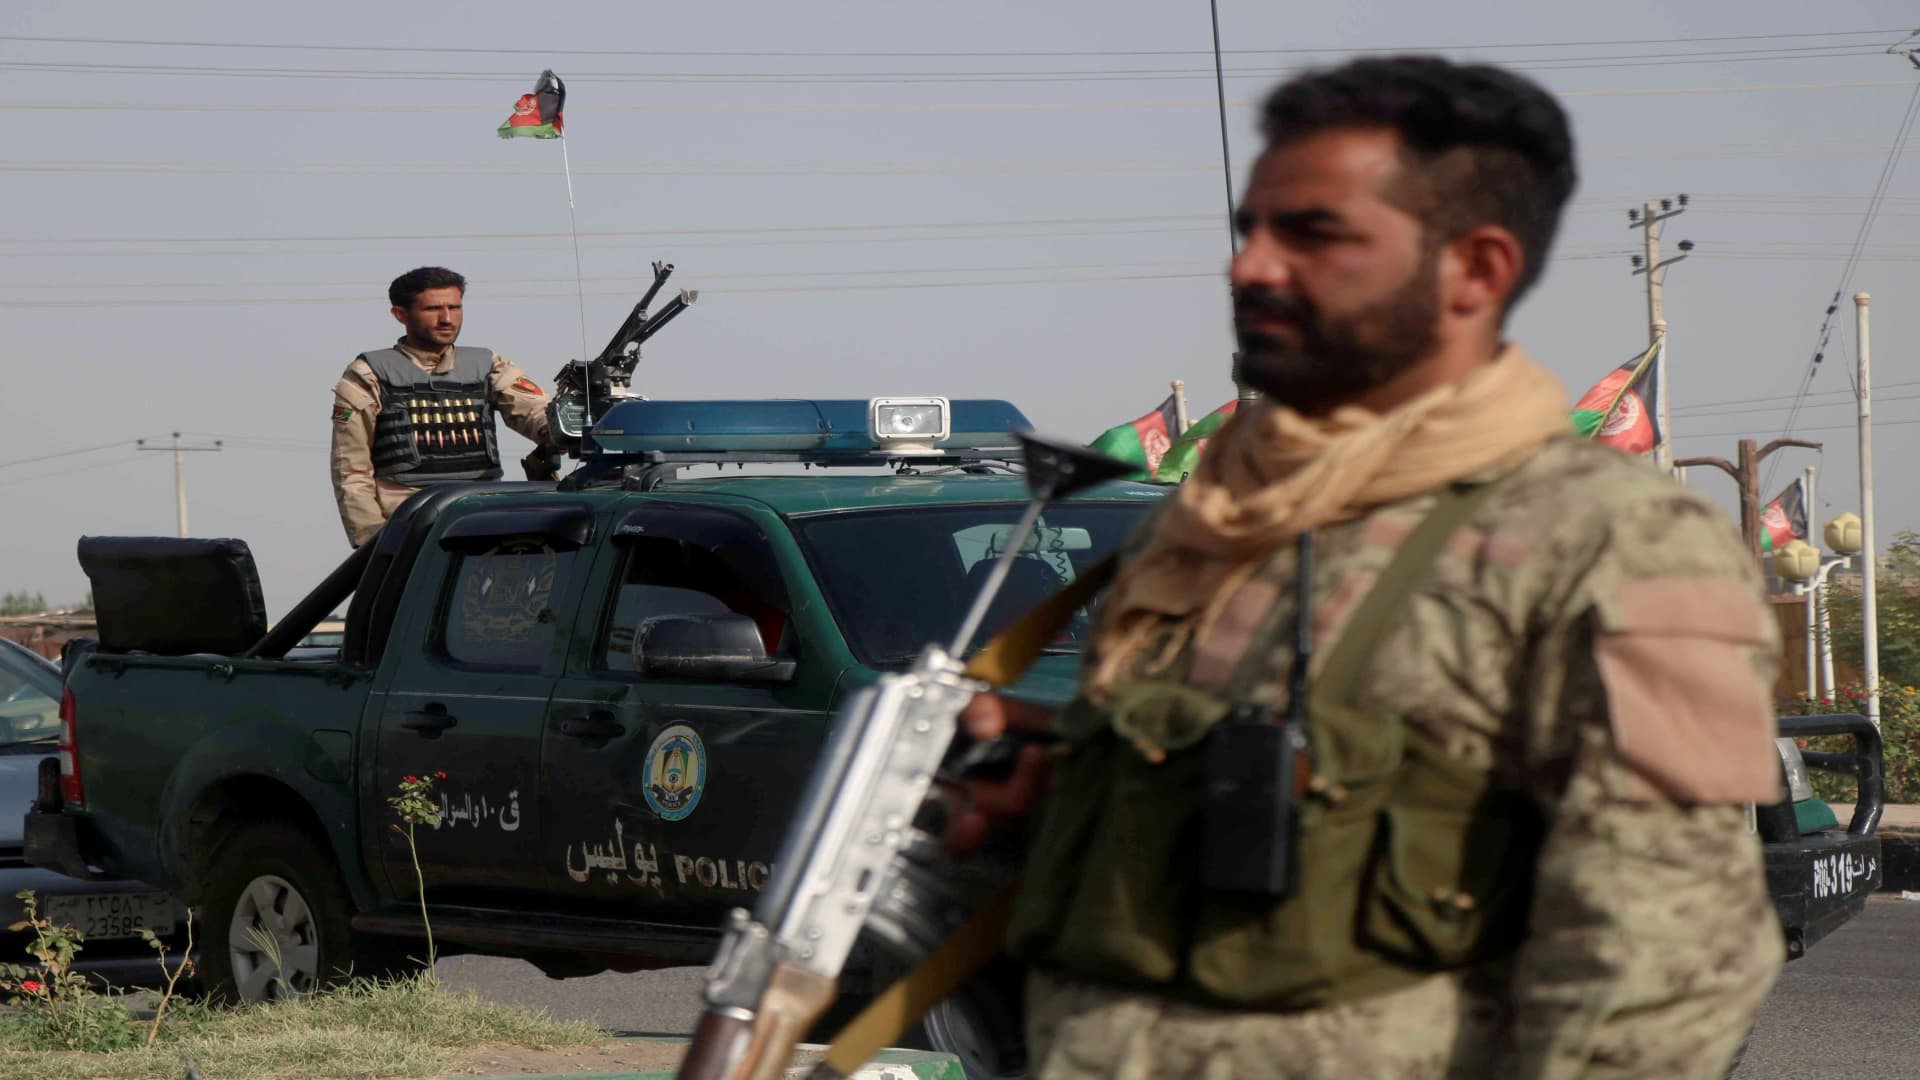 Afghan security forces keep watch at a checkpoint in the Guzara district of Herat province, Afghanistan July 9, 2021.